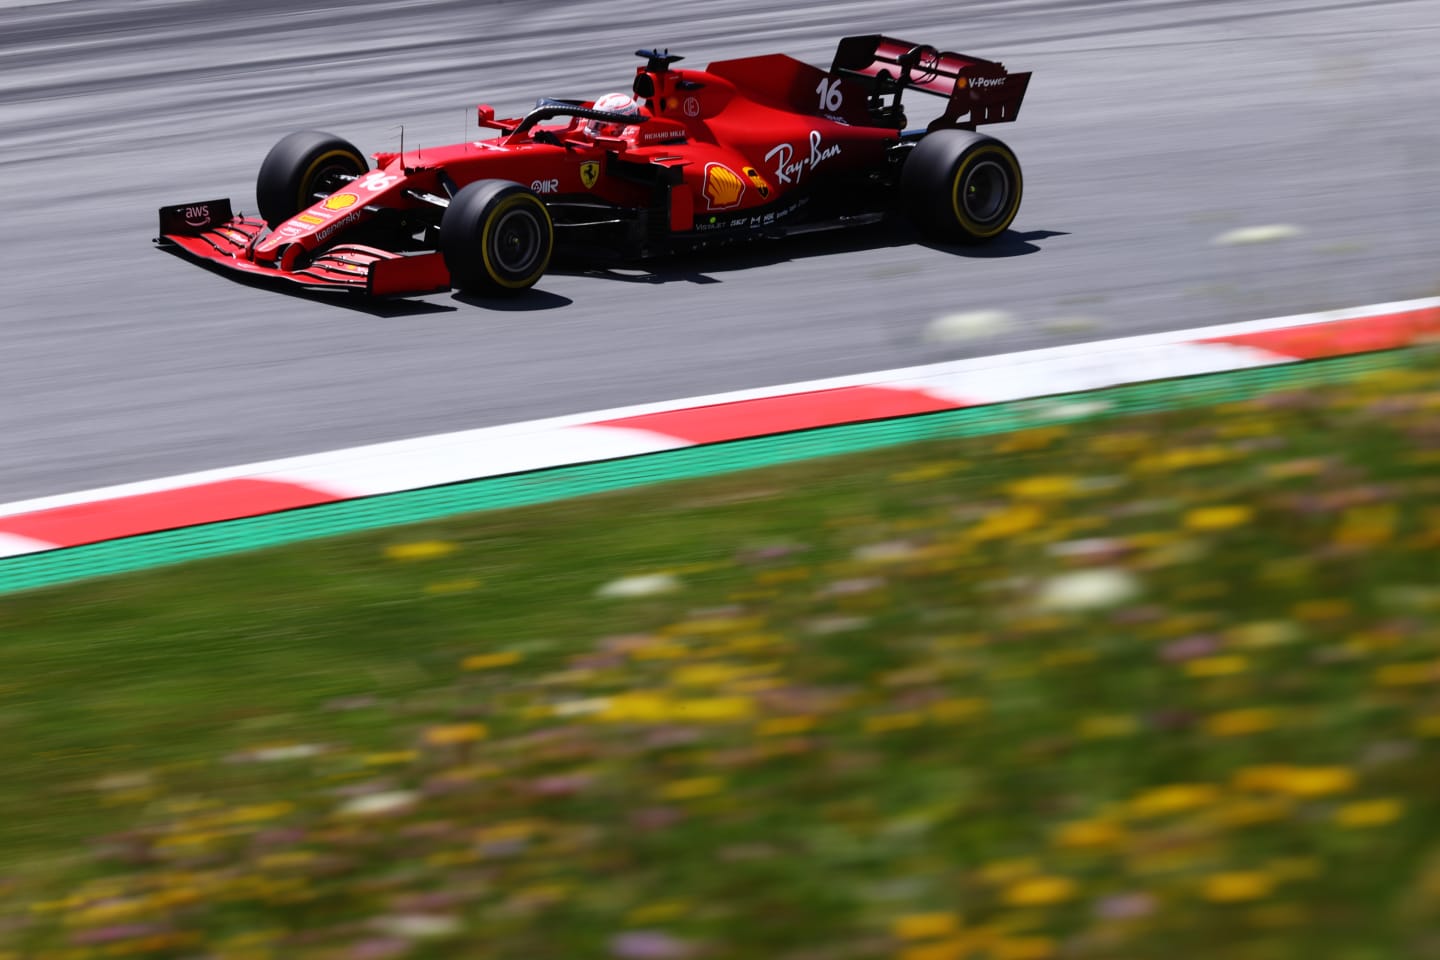 SPIELBERG, AUSTRIA - JUNE 26: Charles Leclerc of Monaco driving the (16) Scuderia Ferrari SF21 on track during final practice ahead of the F1 Grand Prix of Styria at Red Bull Ring on June 26, 2021 in Spielberg, Austria. (Photo by Clive Rose/Getty Images)